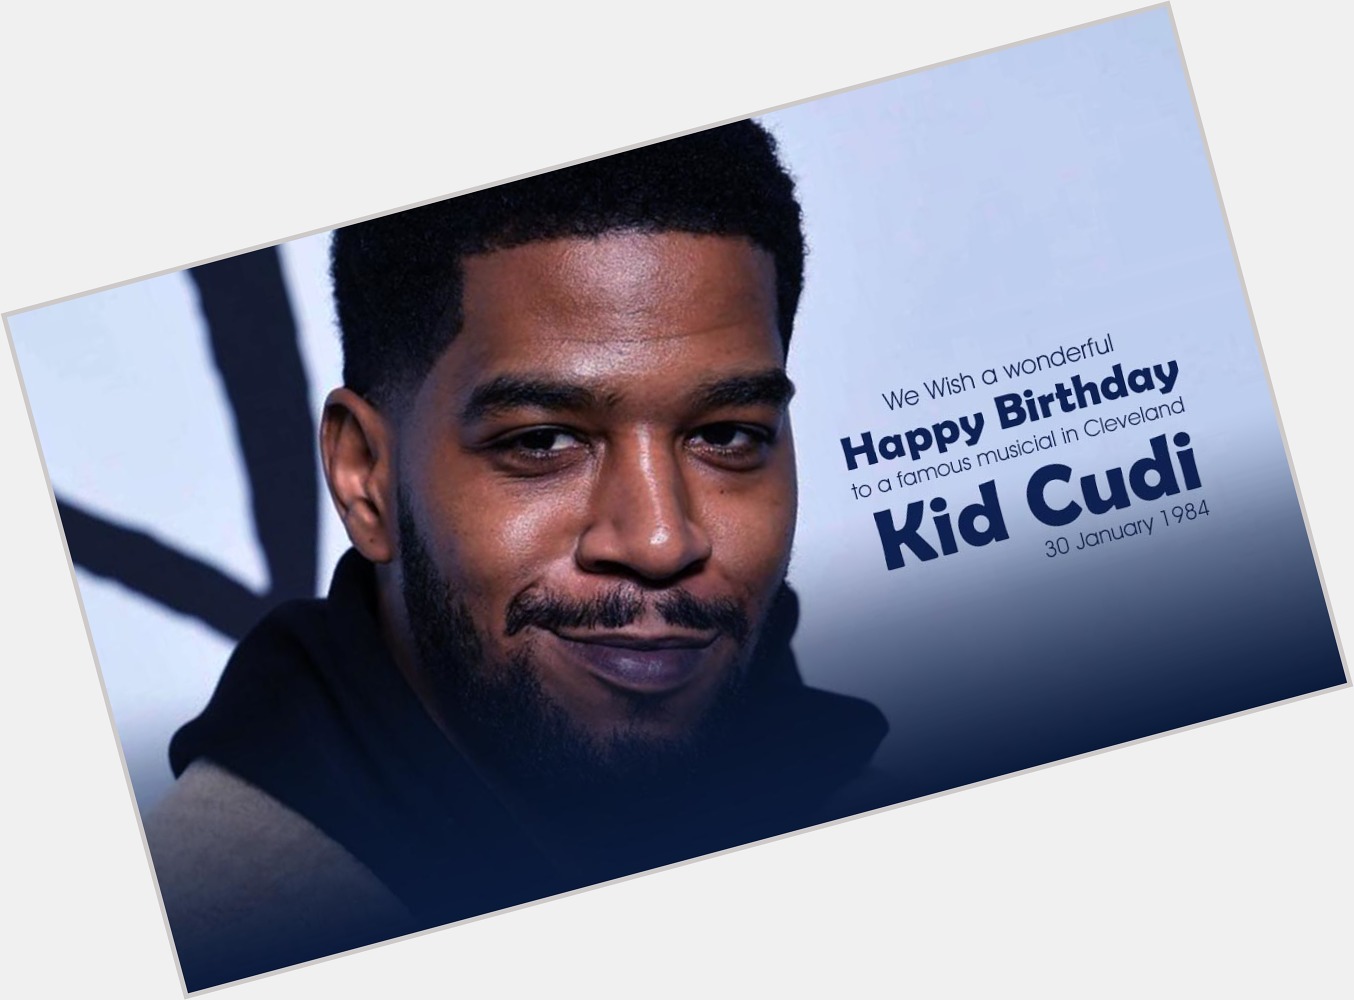 We Wish a wonderful Happy Birthday to a famous musicial in Cleveland Kid Cudi who was born on 30 January 1984. 